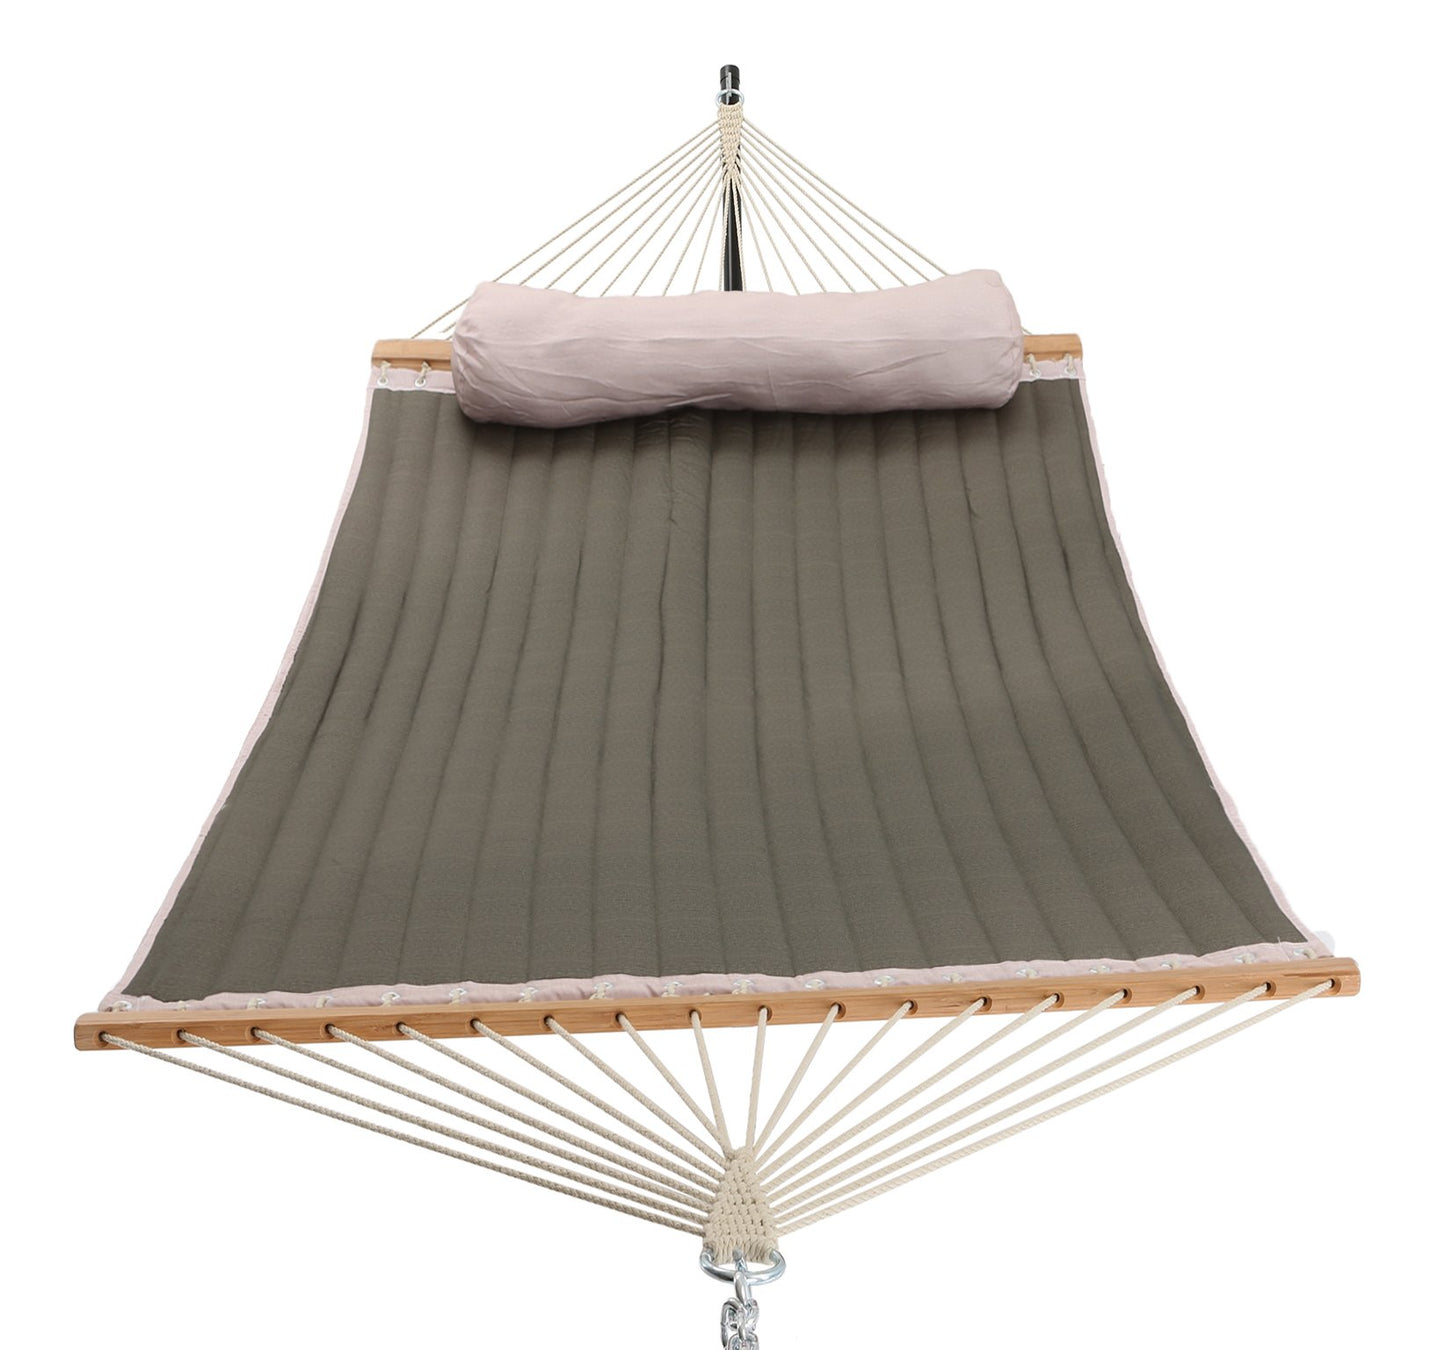 Fabric Hammock with Pillow - Patio Watcher